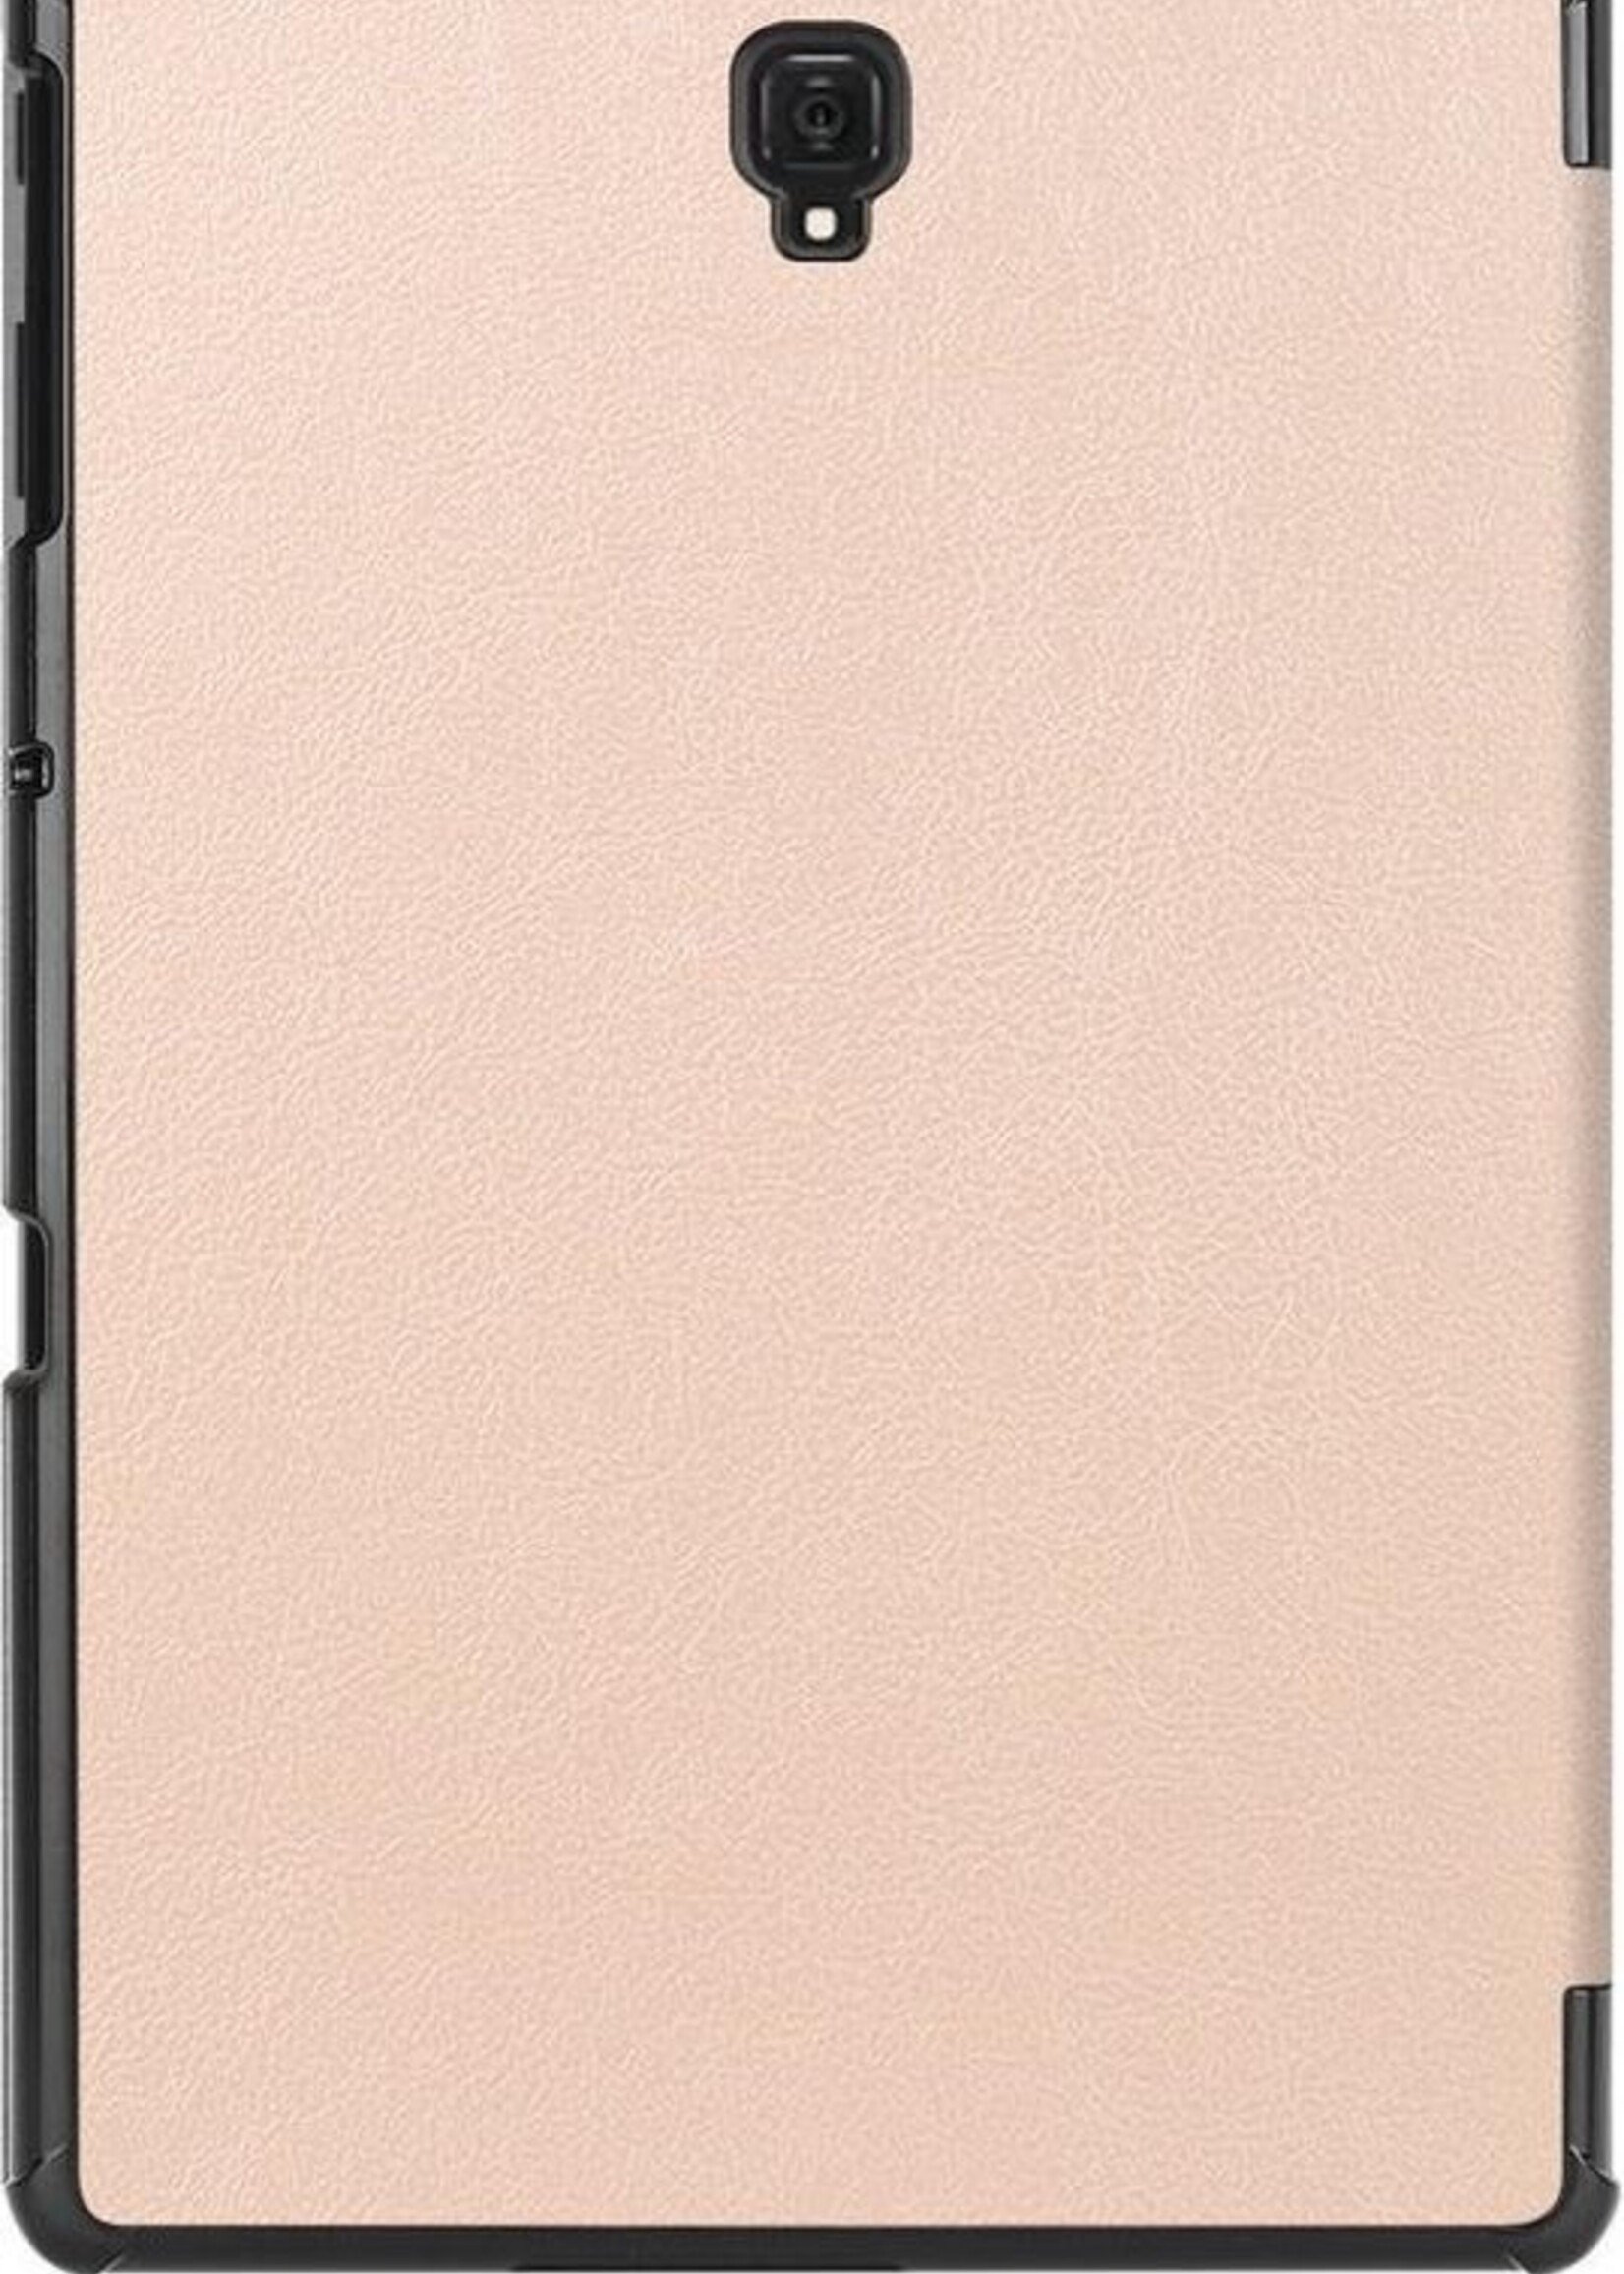 BTH Hoes Geschikt voor Samsung Galaxy Tab A 10.5 2018 Hoes Book Case Hoesje Trifold Cover - Hoesje Geschikt voor Samsung Tab A 10.5 2018 Hoesje Bookcase - Goud